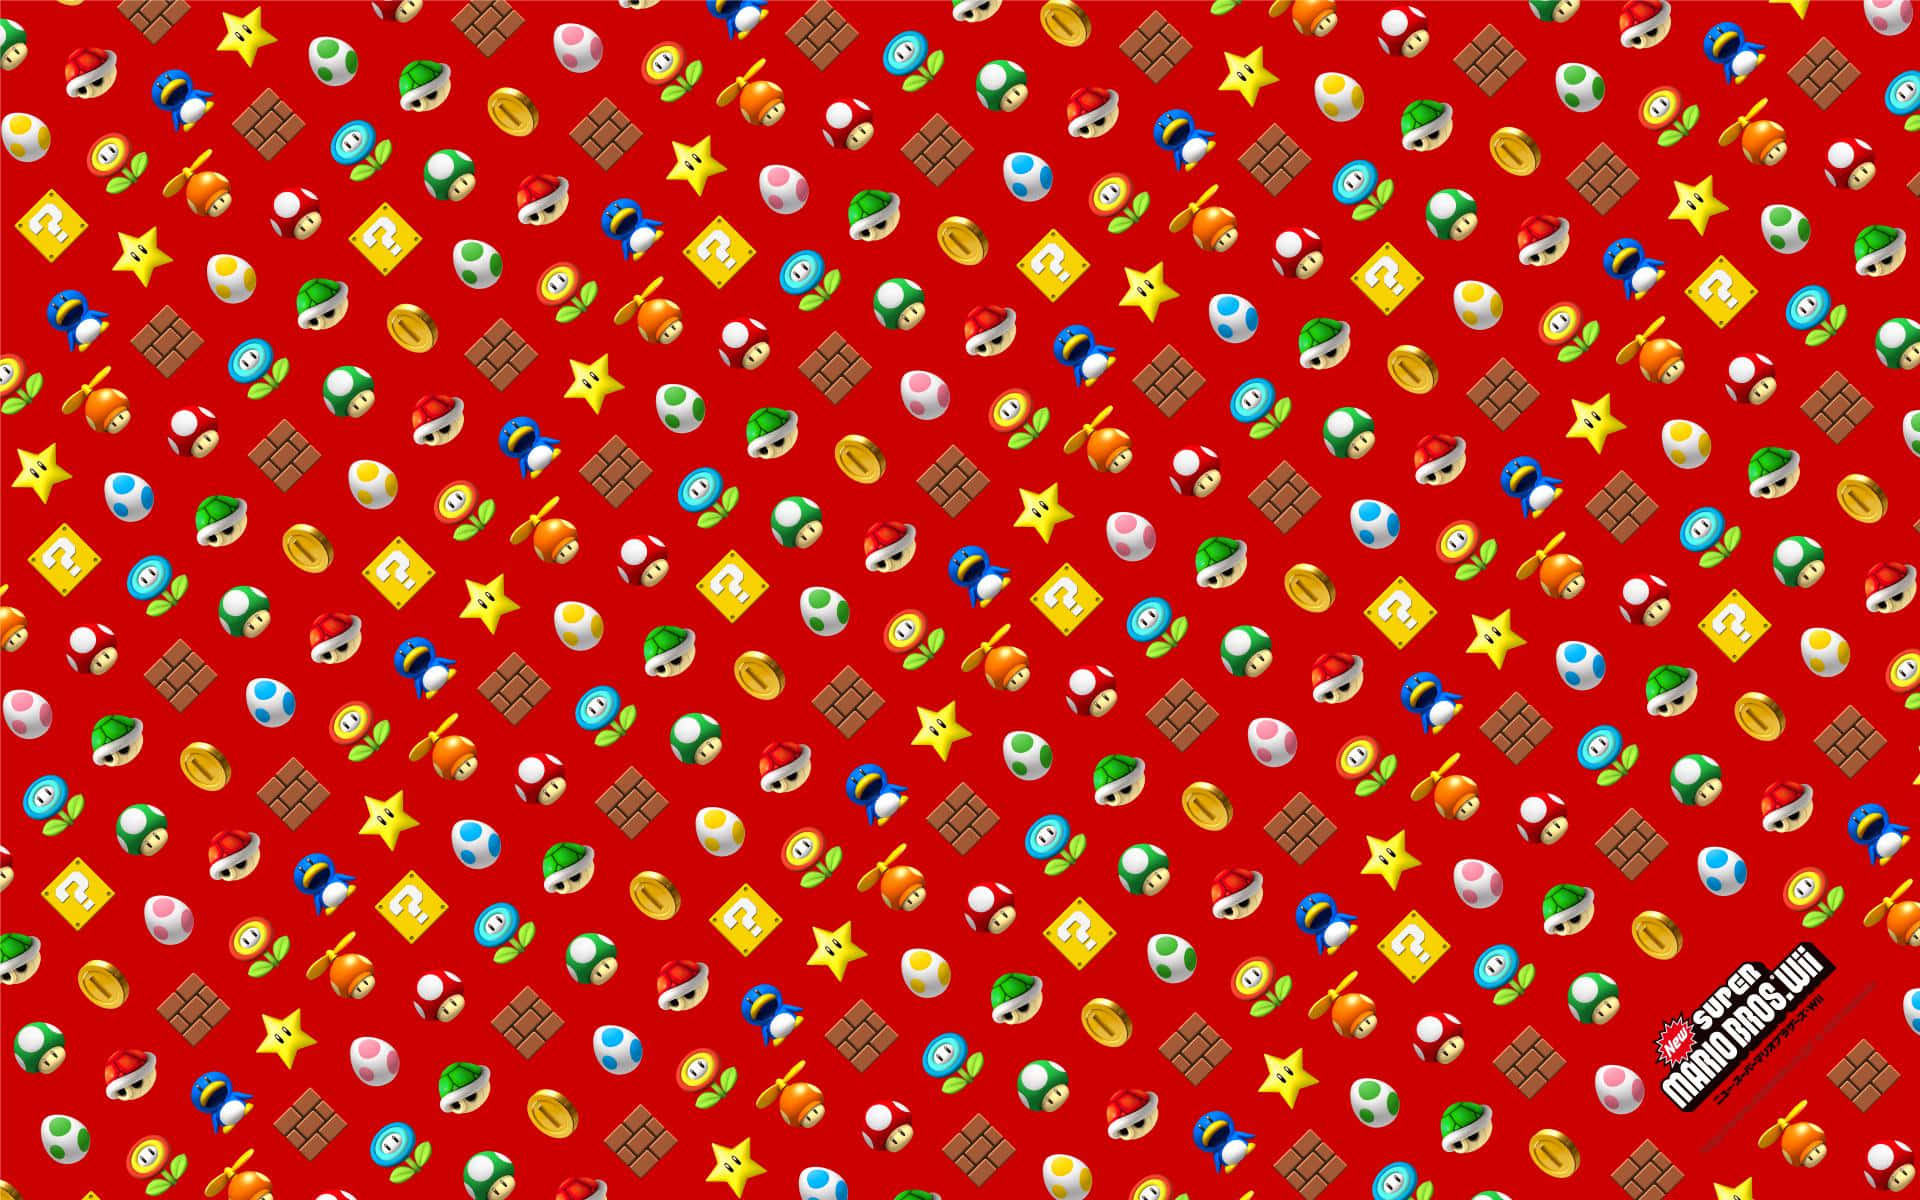 A Red Background With Many Different Colored Stars